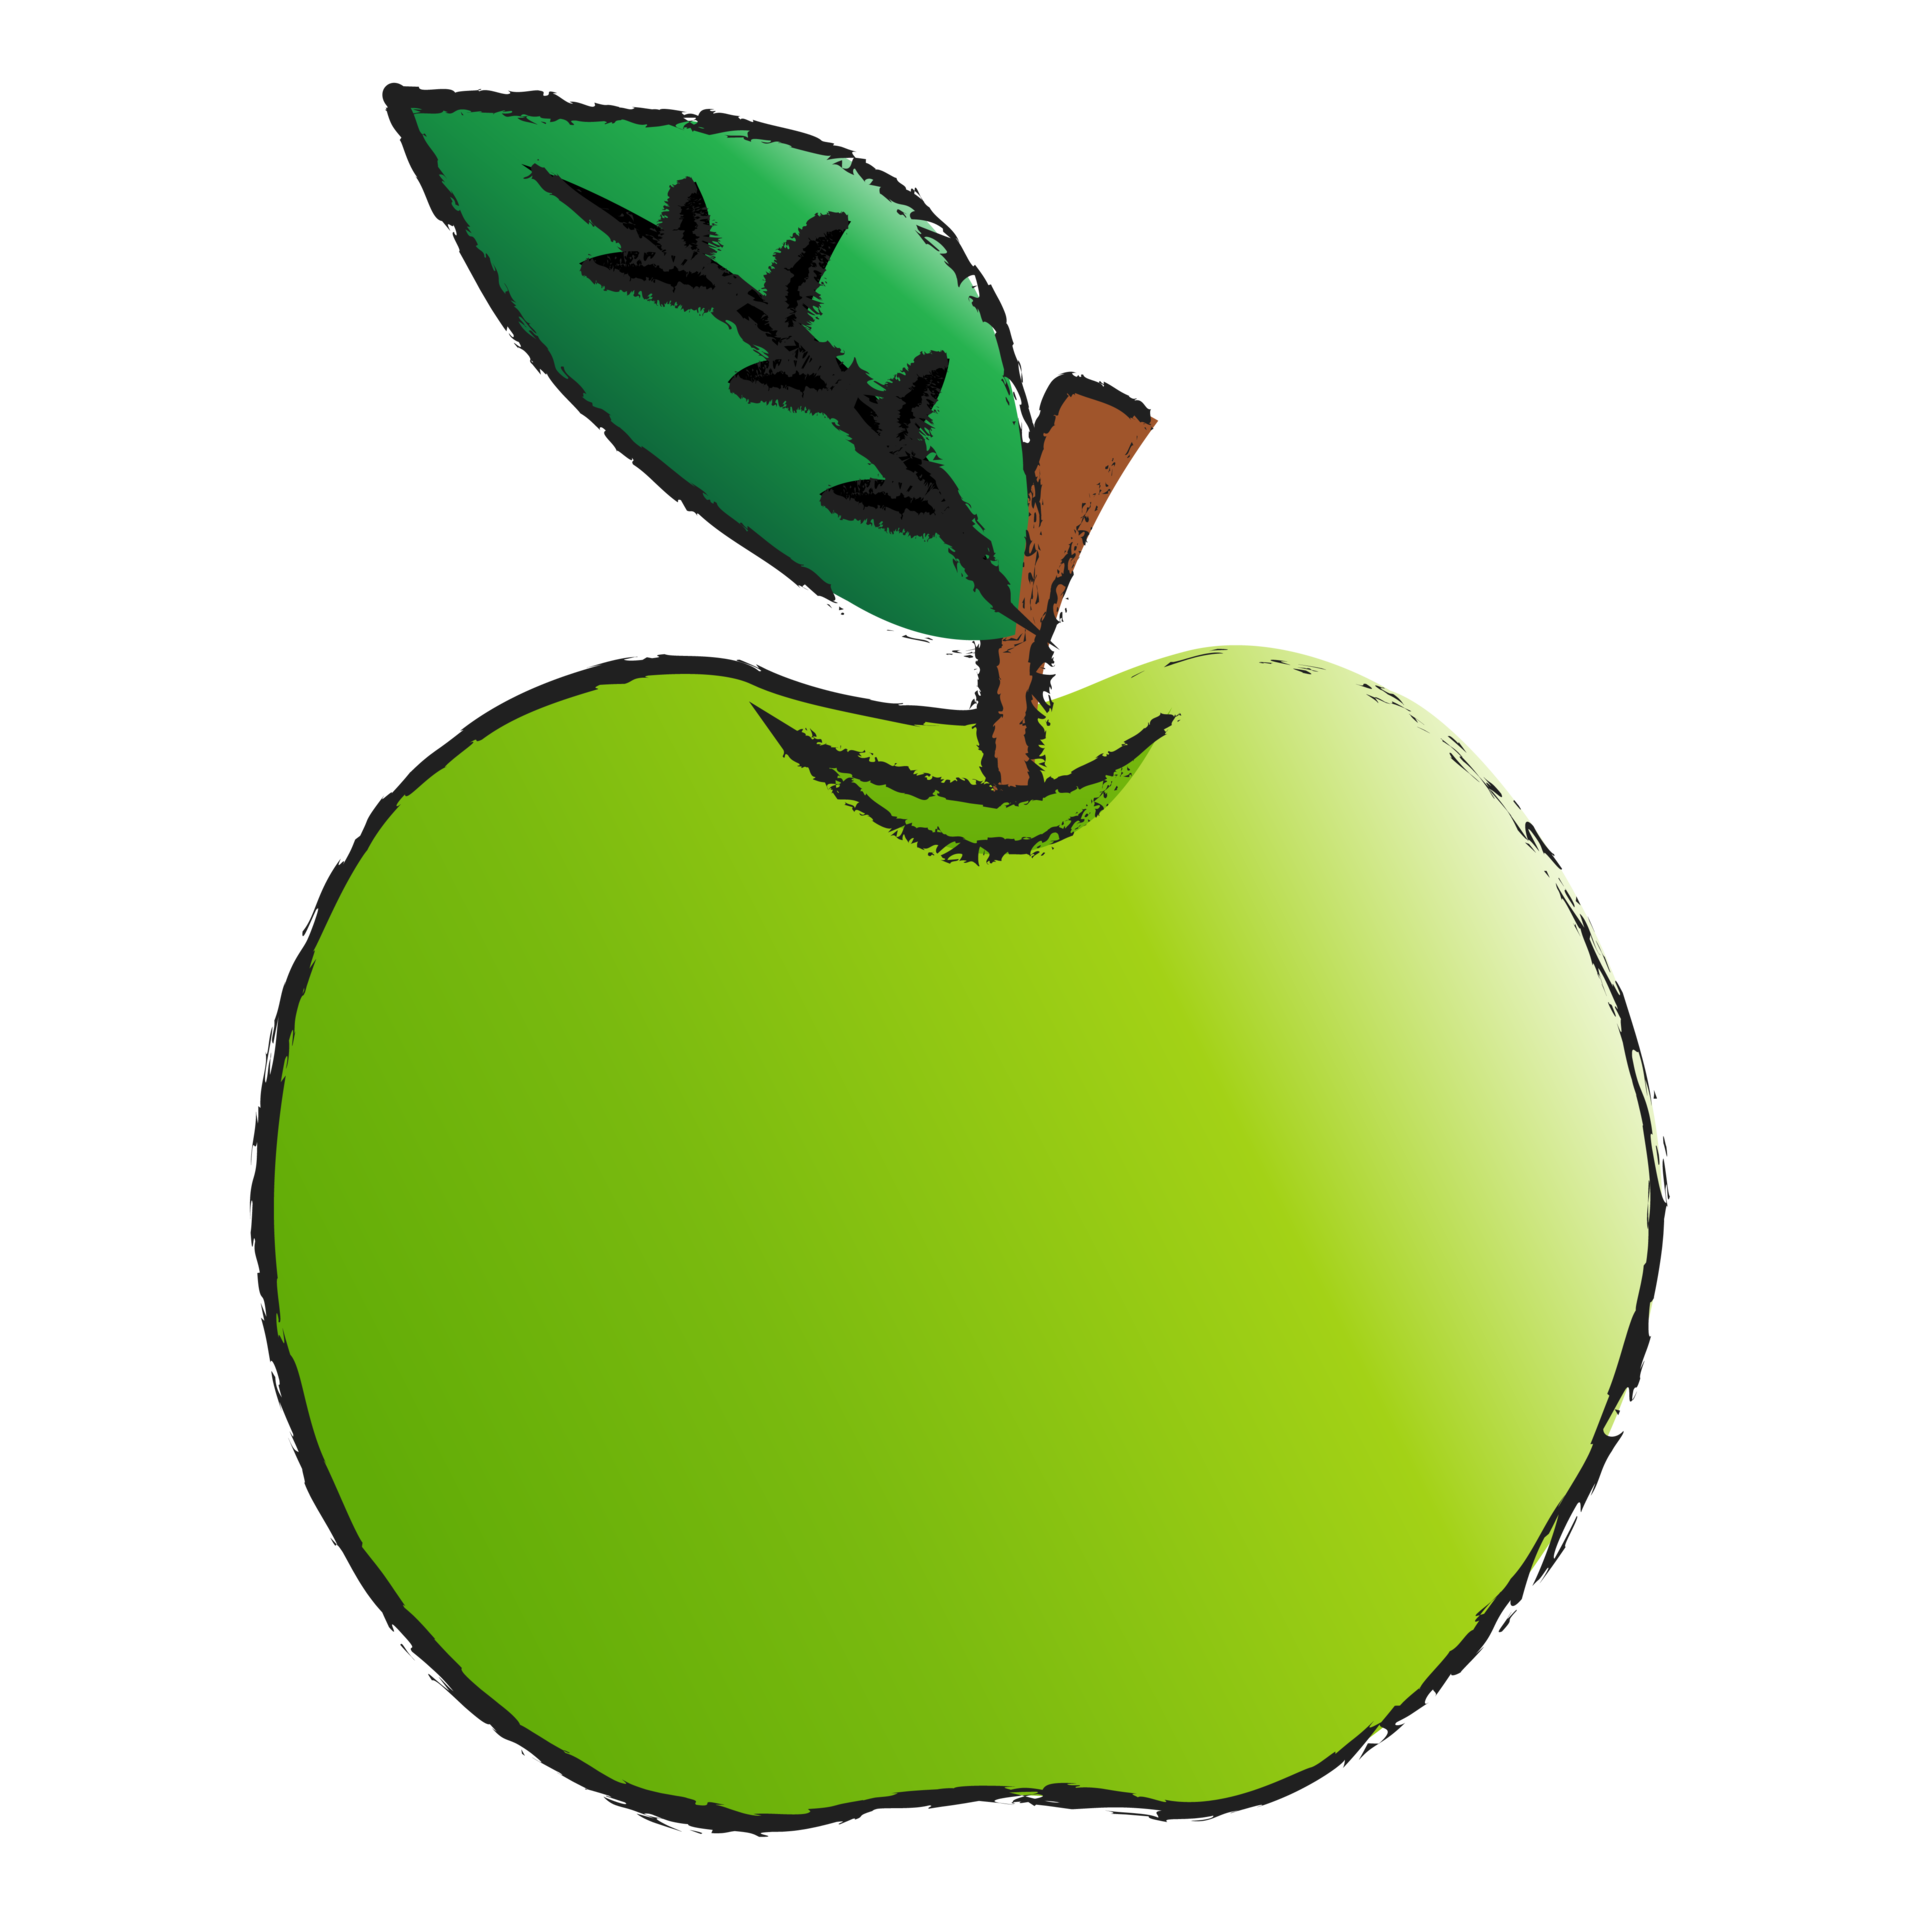 Green Apple PNG Image HD